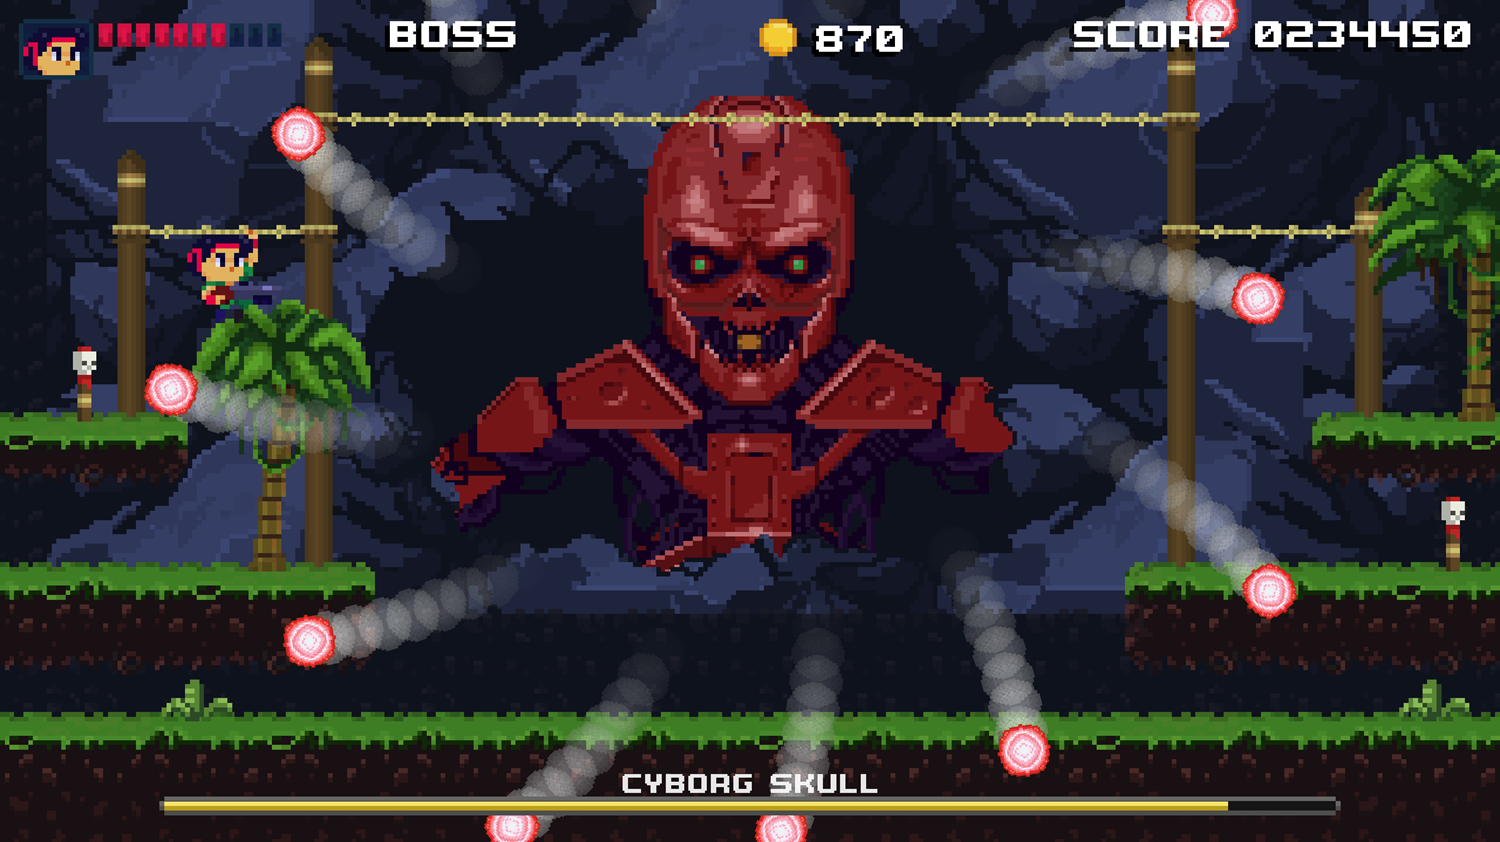 Brave Soldier Invasion of Cyborgs Game Cyborg Skull Red Attack Screenshot.